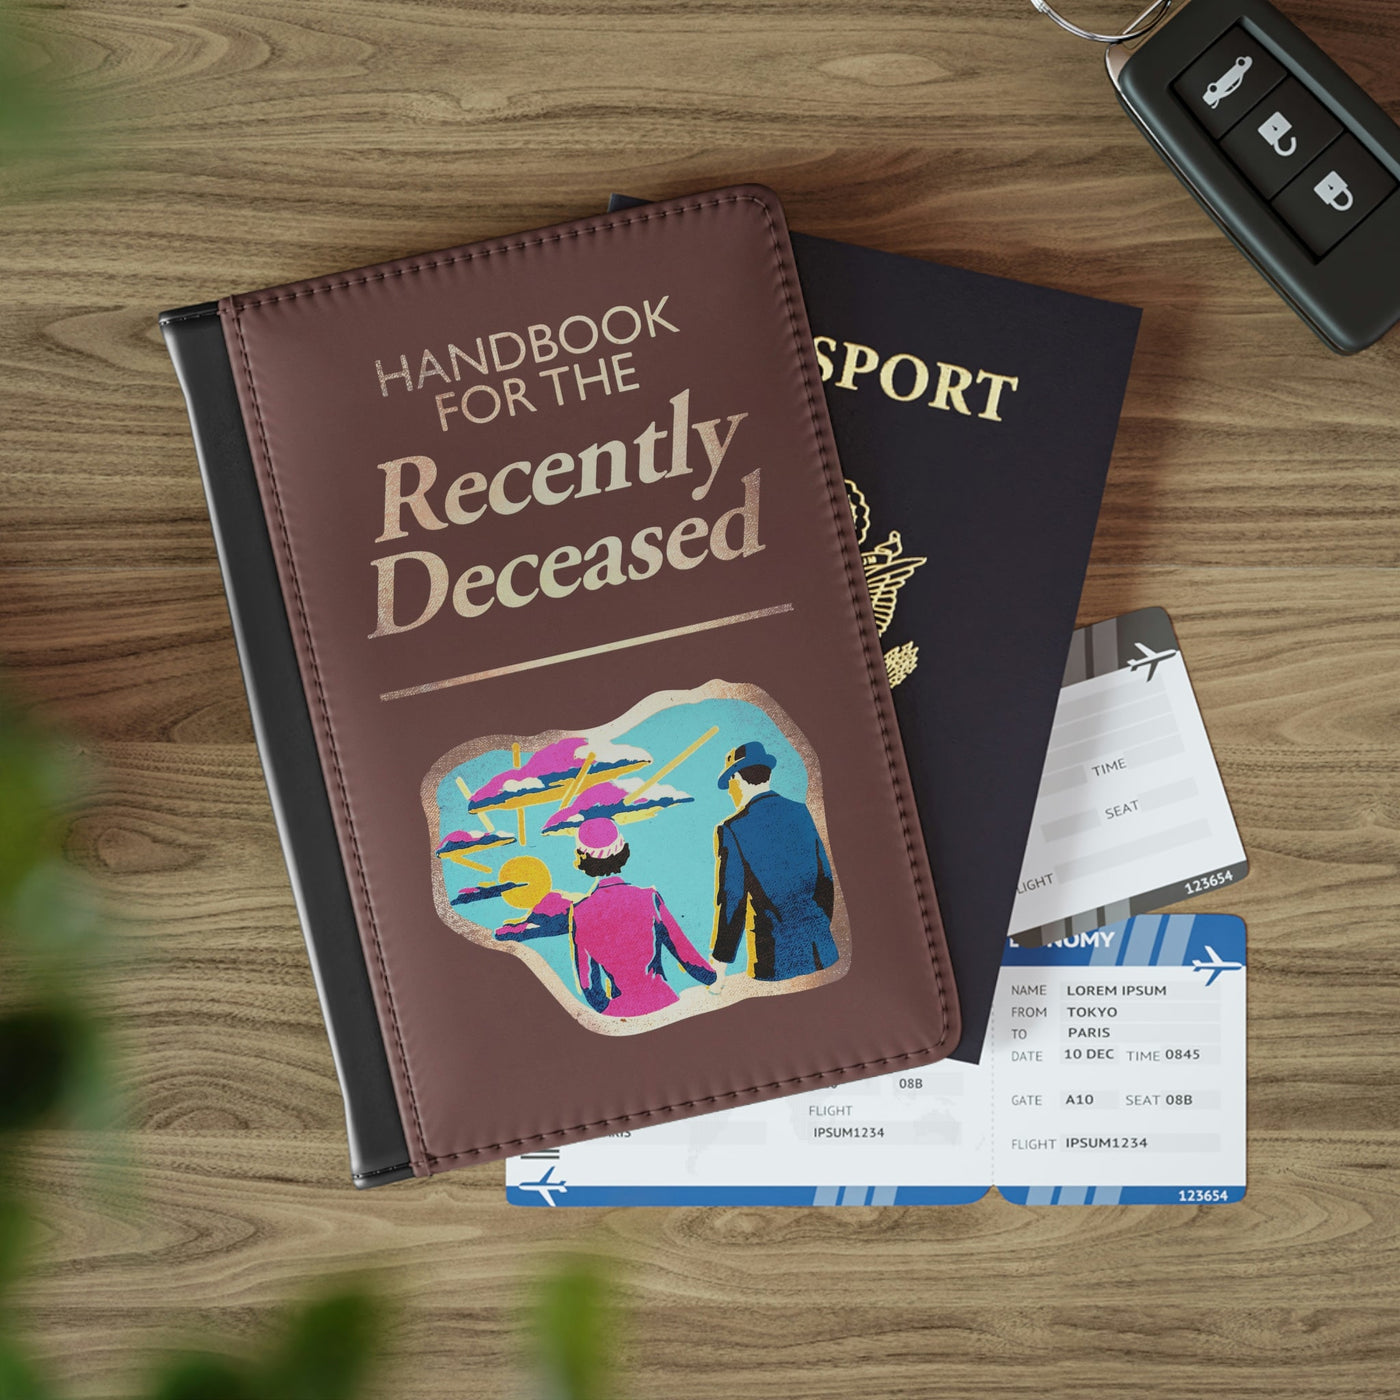 The Handbook for the recently deceased - Beetlejuice, Passport Cover | TimeElements.shop